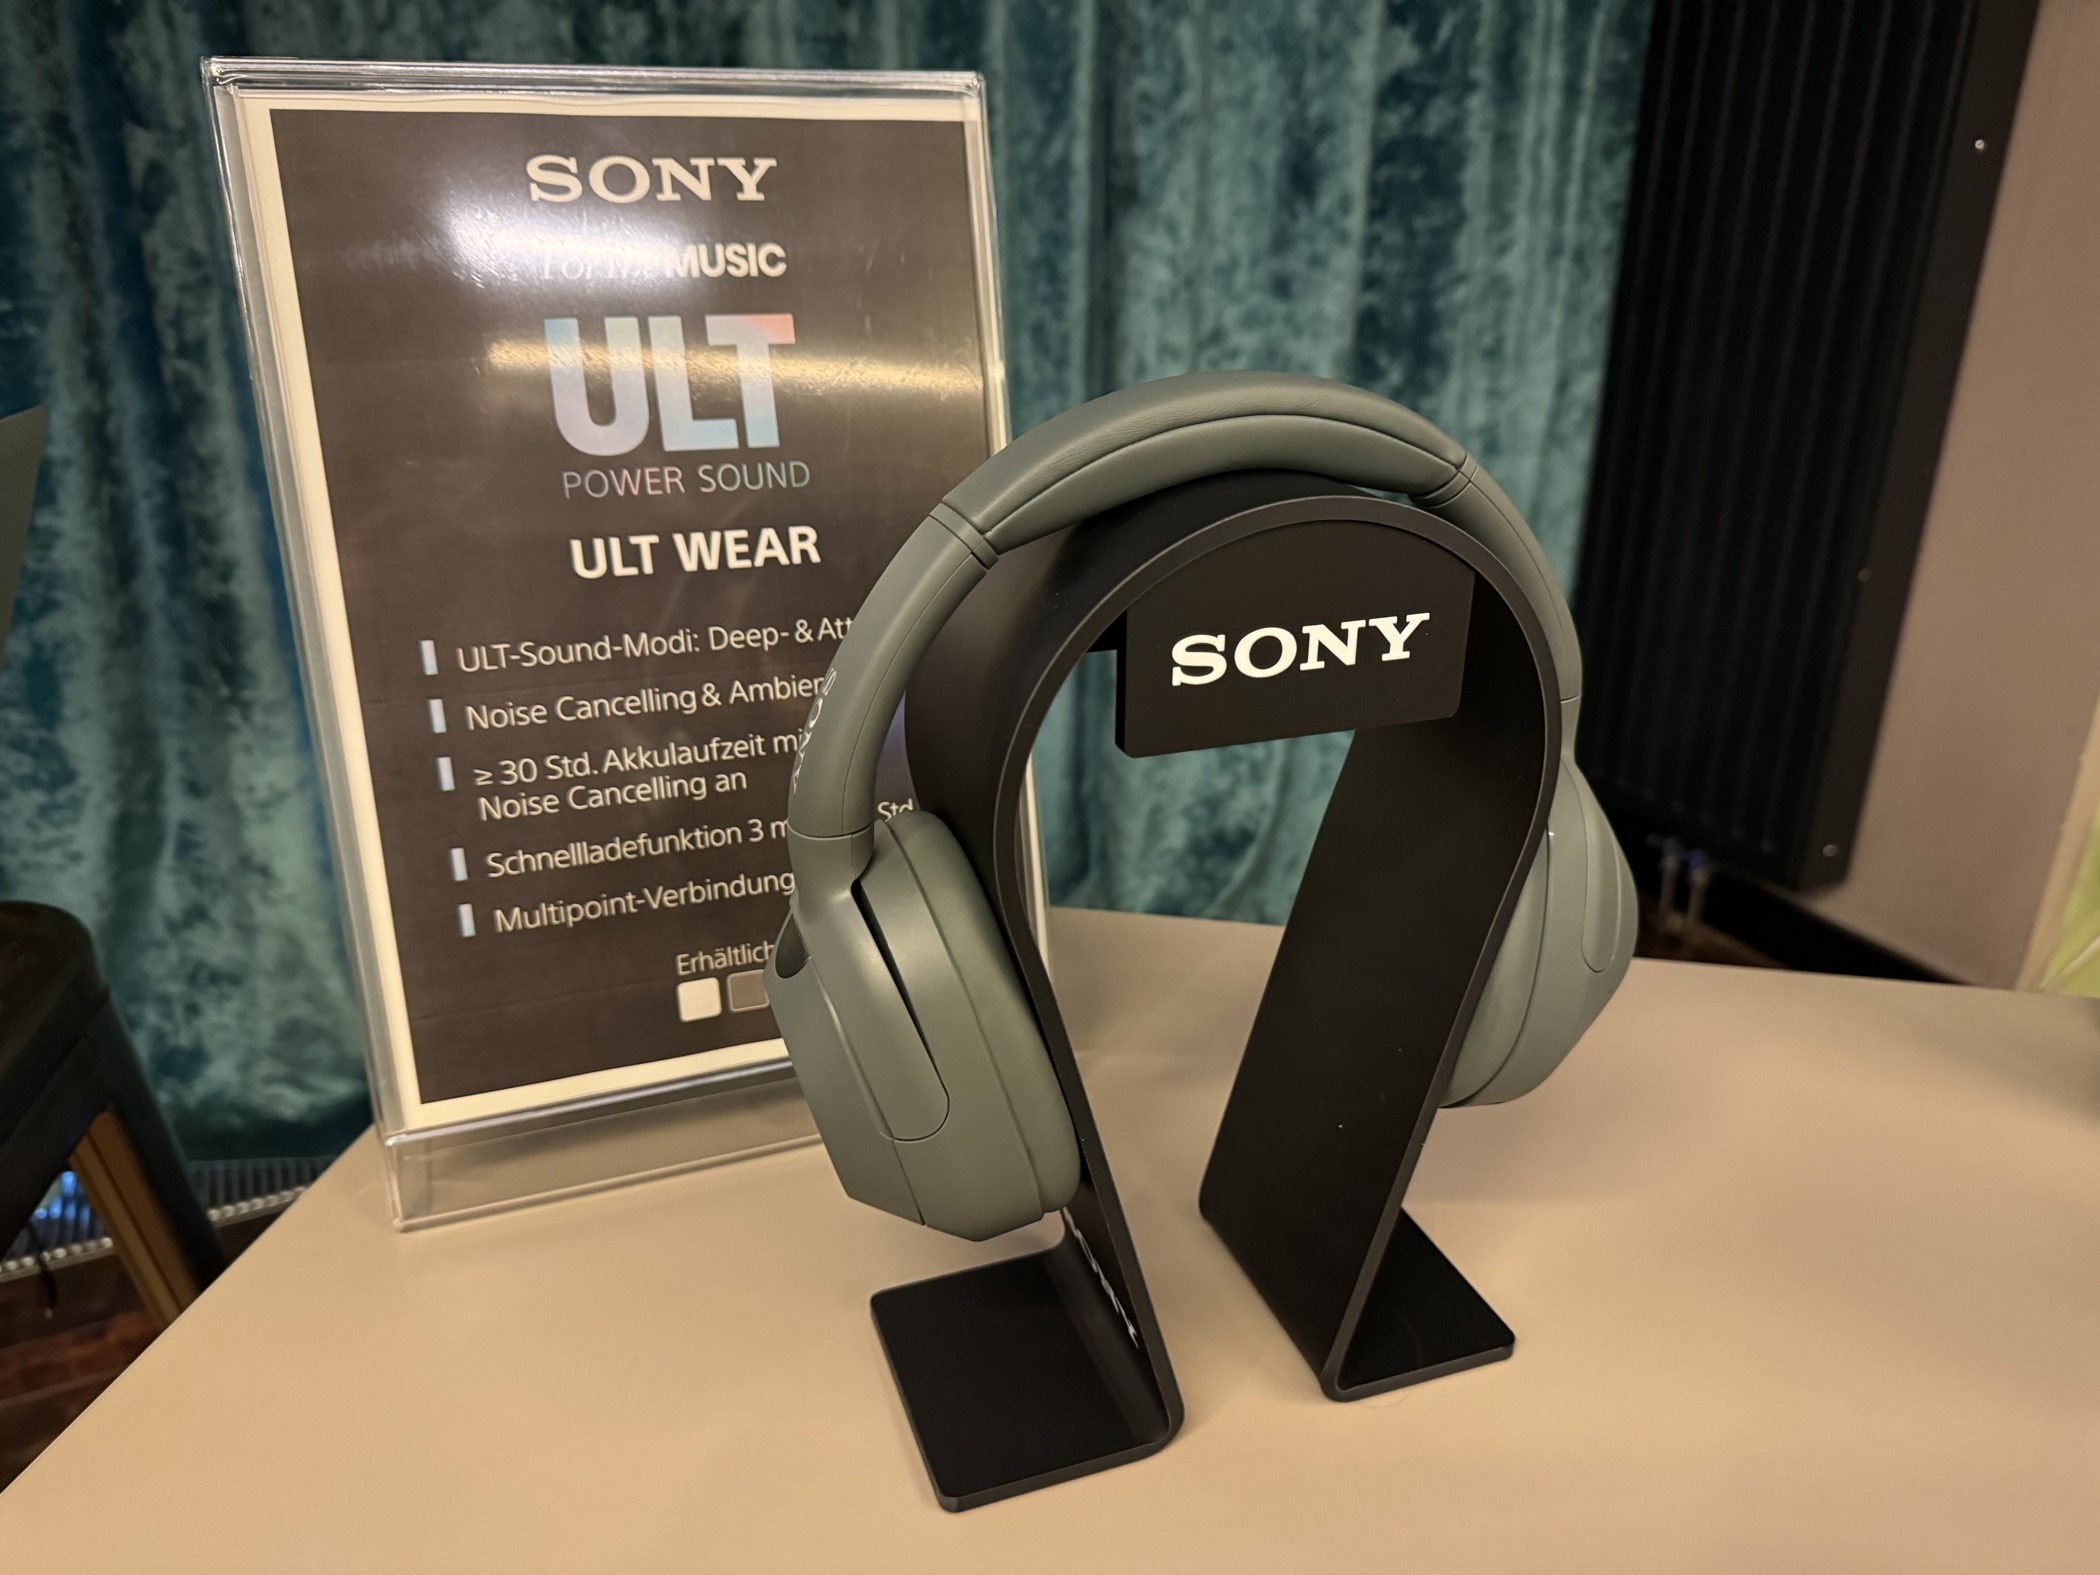 Sony ULT WEAR featured image